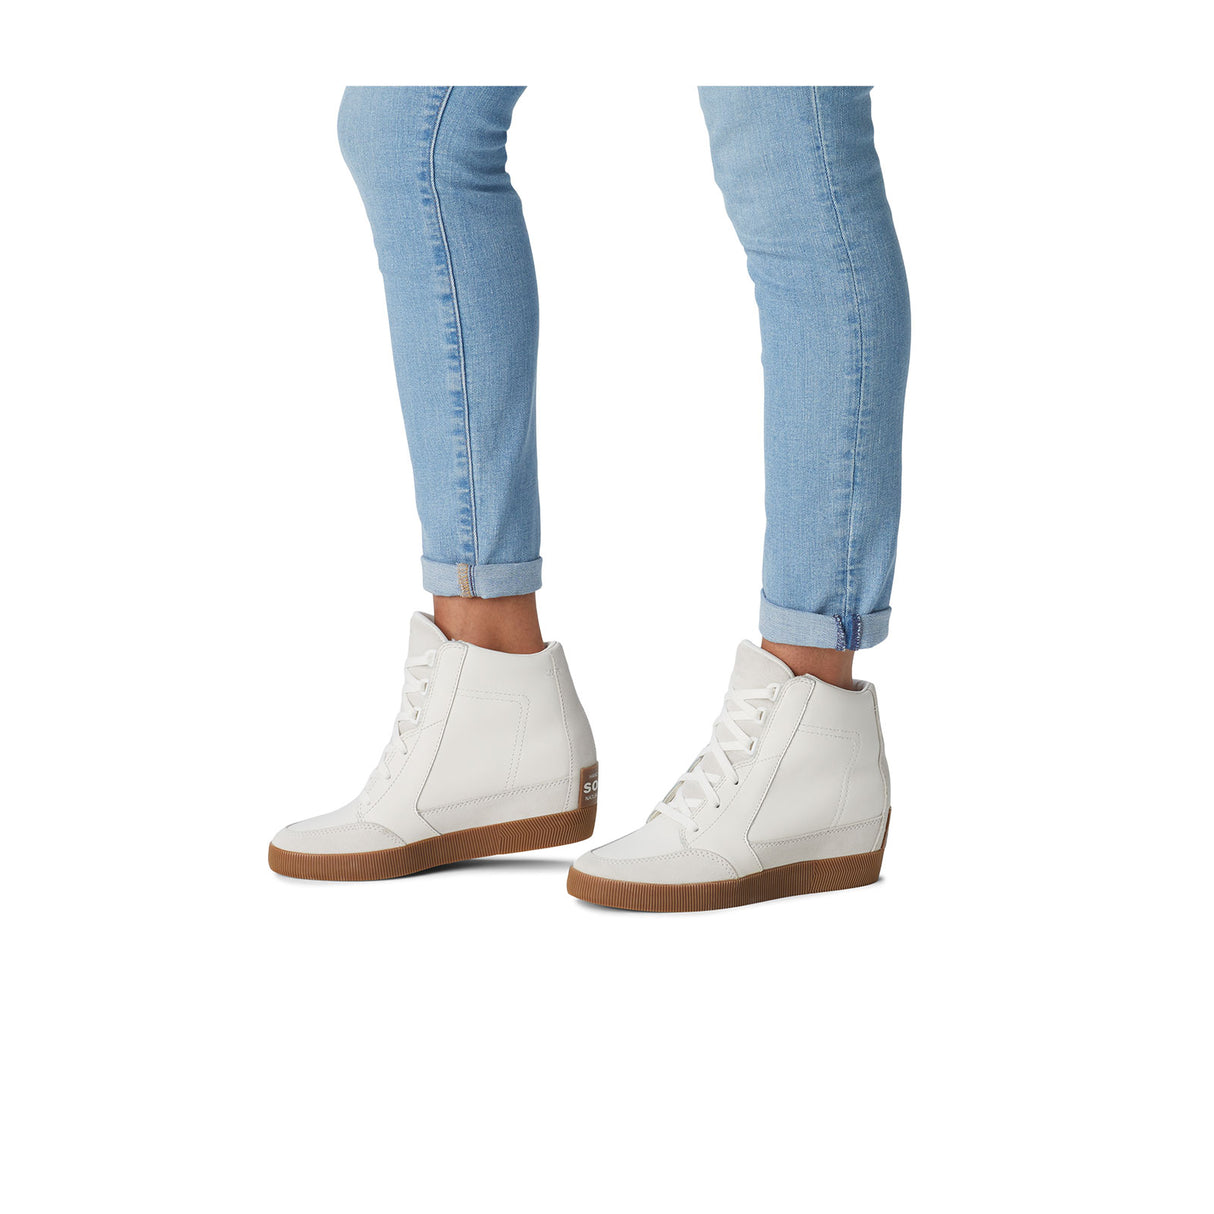 Sorel Out N About Wedge Ankle Boot (Women) - Sea Salt/Gum Boots - Fashion - Wedge - The Heel Shoe Fitters